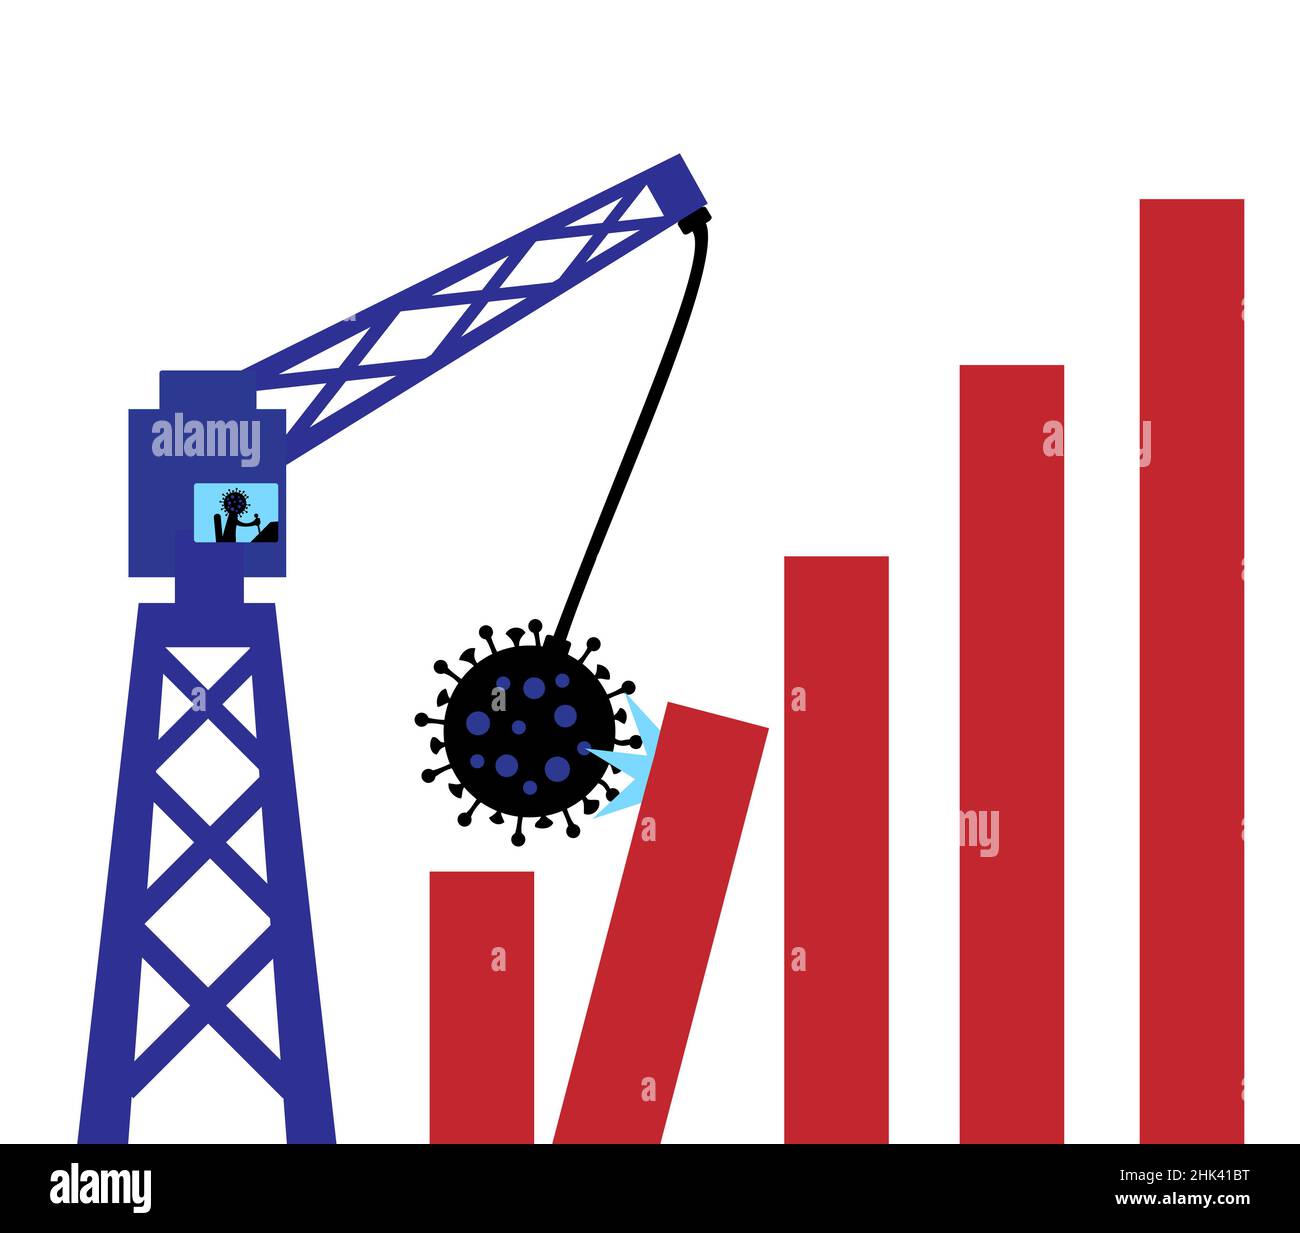 A metaphor using a wrecking ball with a Covid-19 virus crashing into a bar chart to illustrate the impact of the virus on global growth. Stock Photo